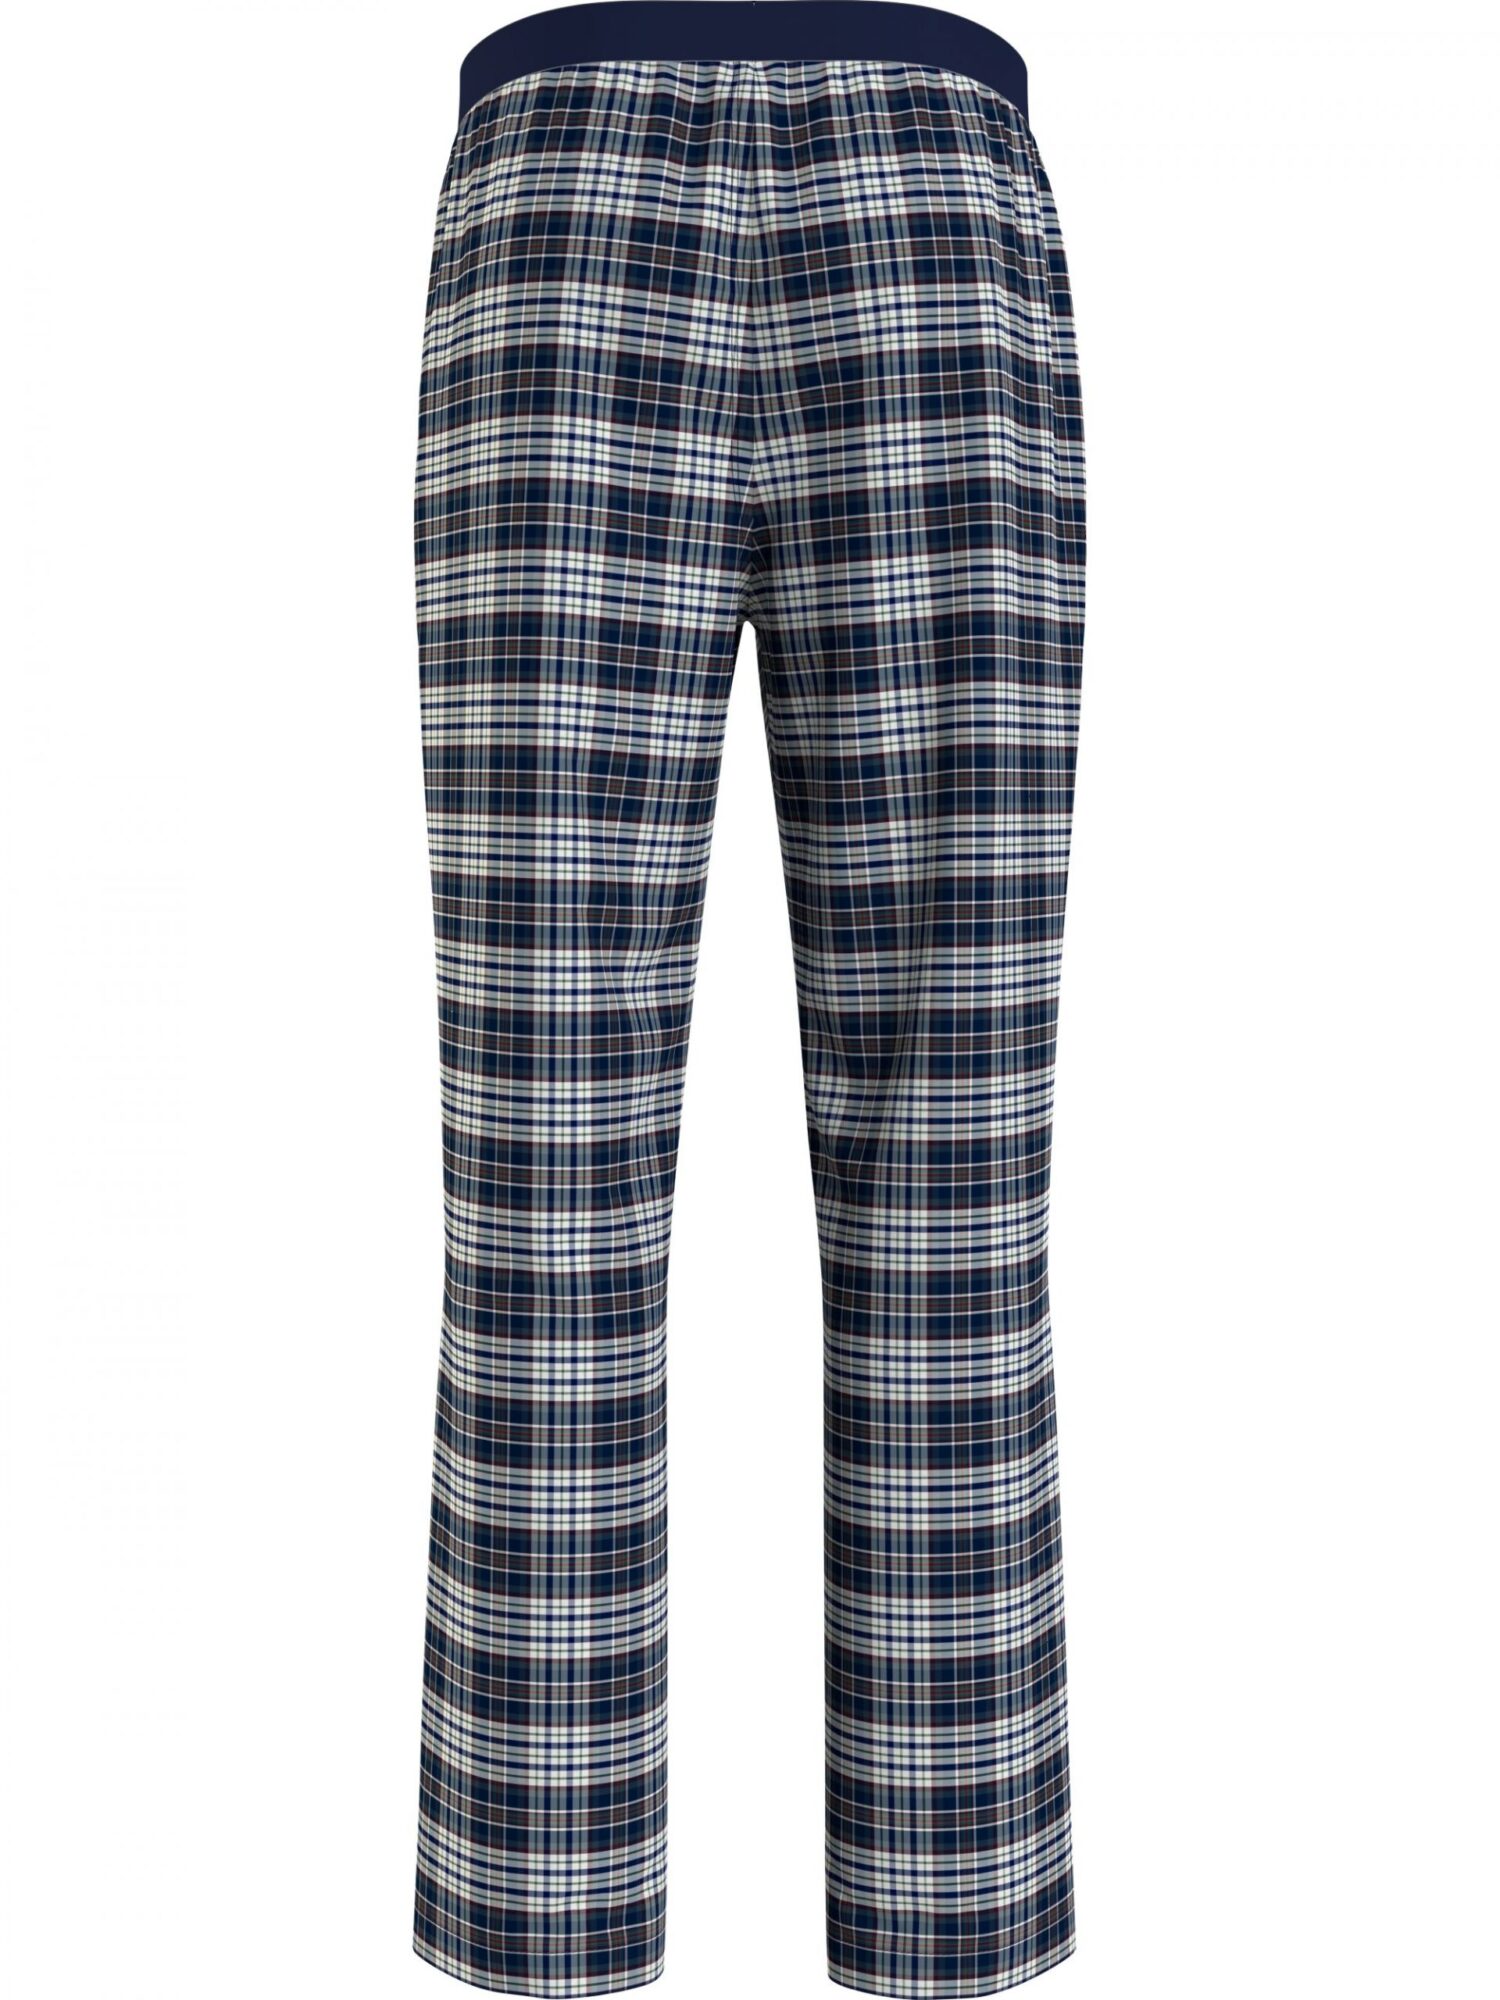 TOMMY HILFIGER WOVEN PANTS | Morans Menswear and Clothing, Thurles, Co ...